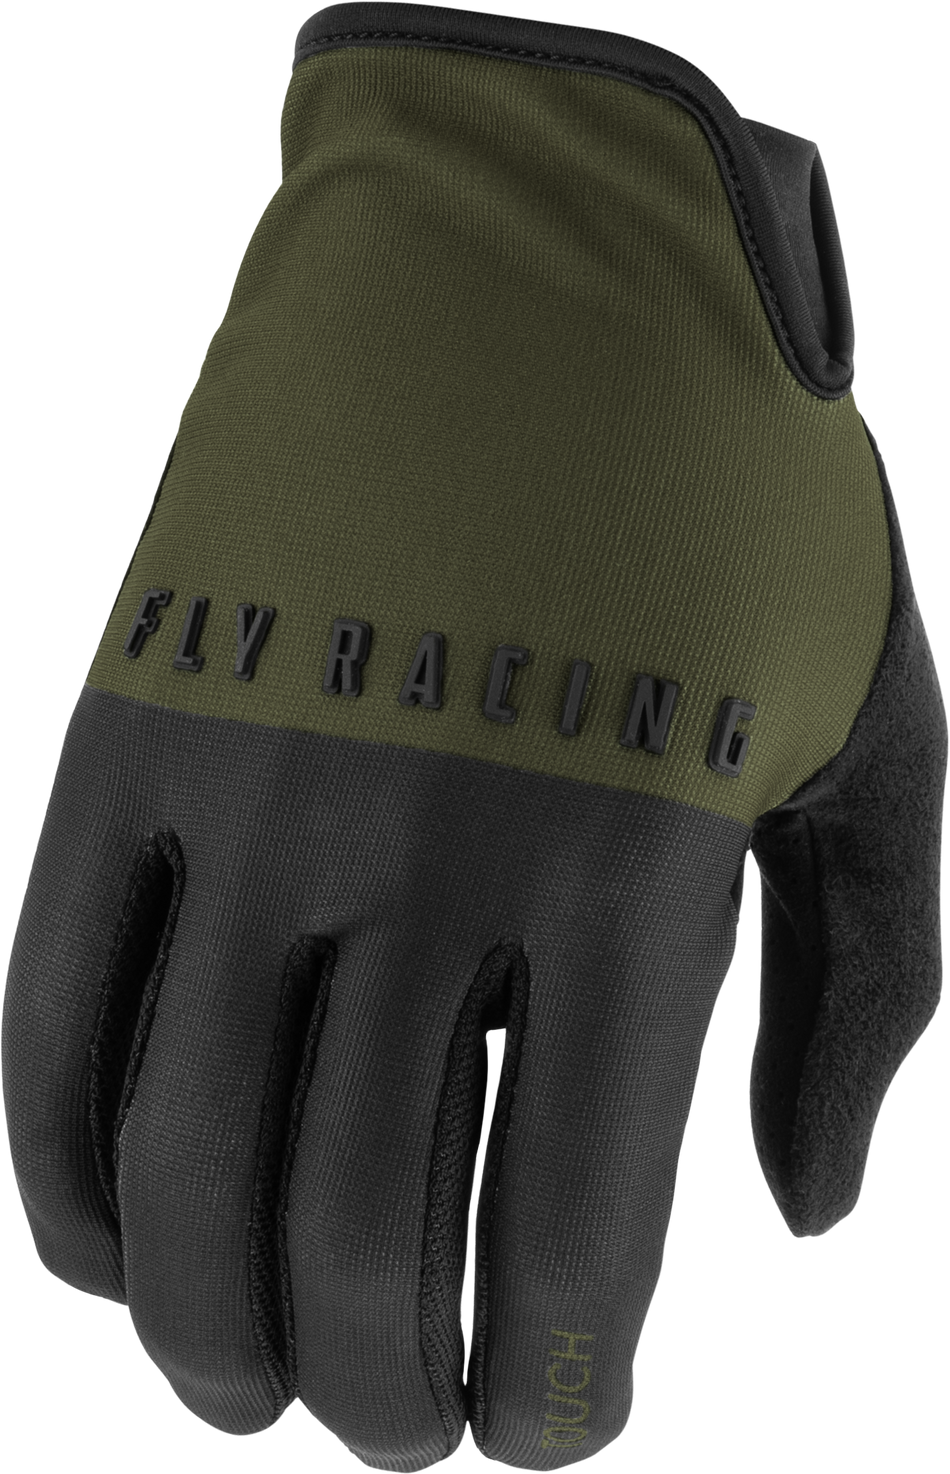 FLY RACING Youth Media Gloves Dark Forest/Black Yl 350-0122YL